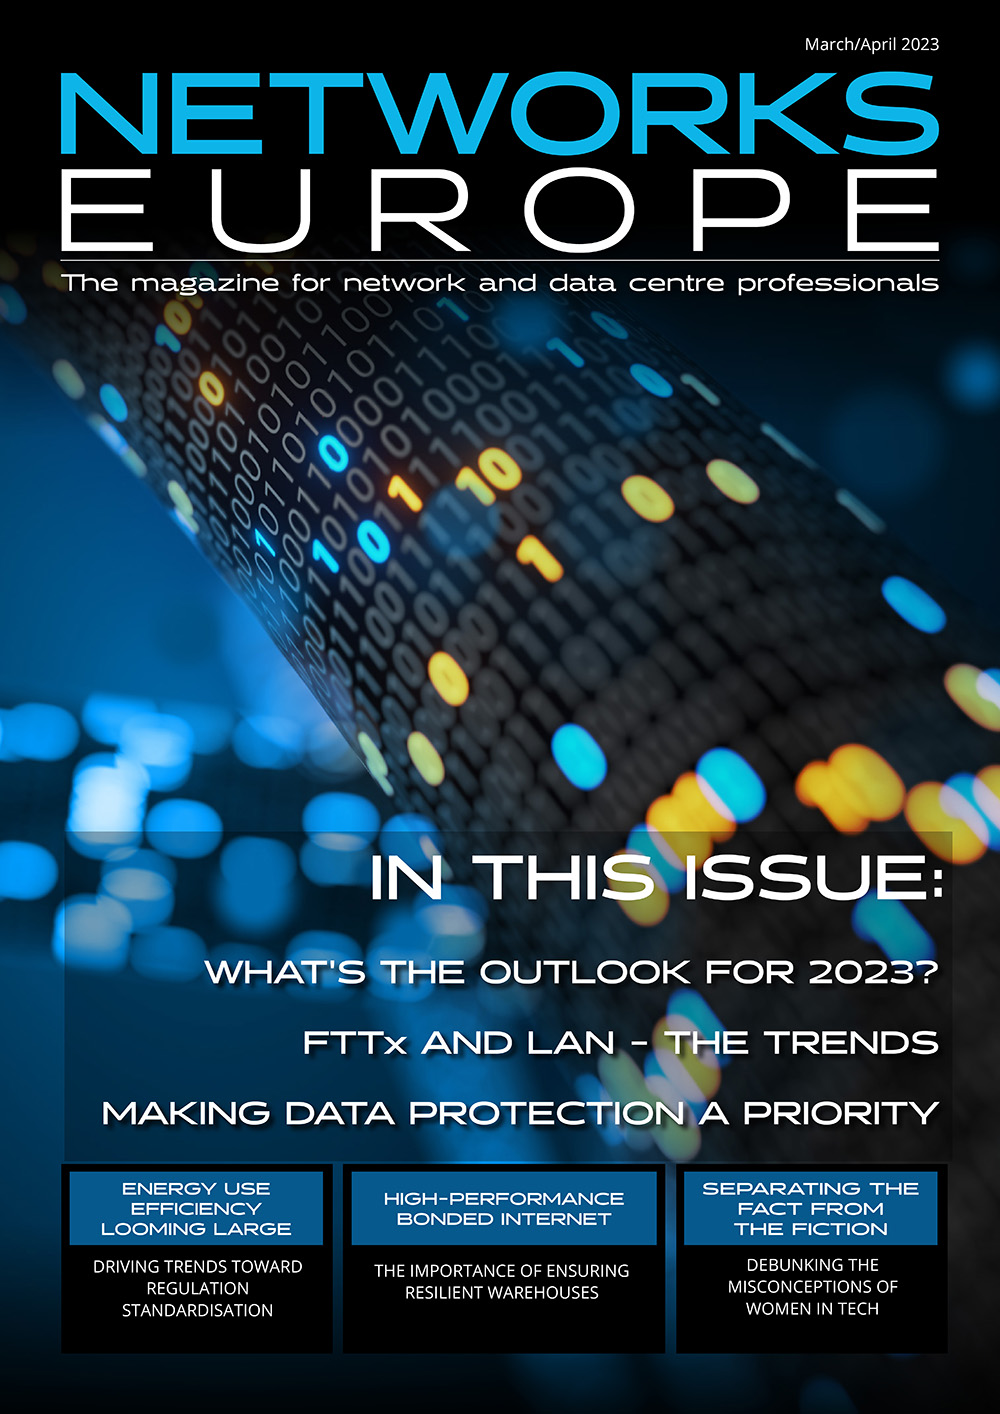 Networks Europe Magazine - March/April 2023 Issue - Front Cover